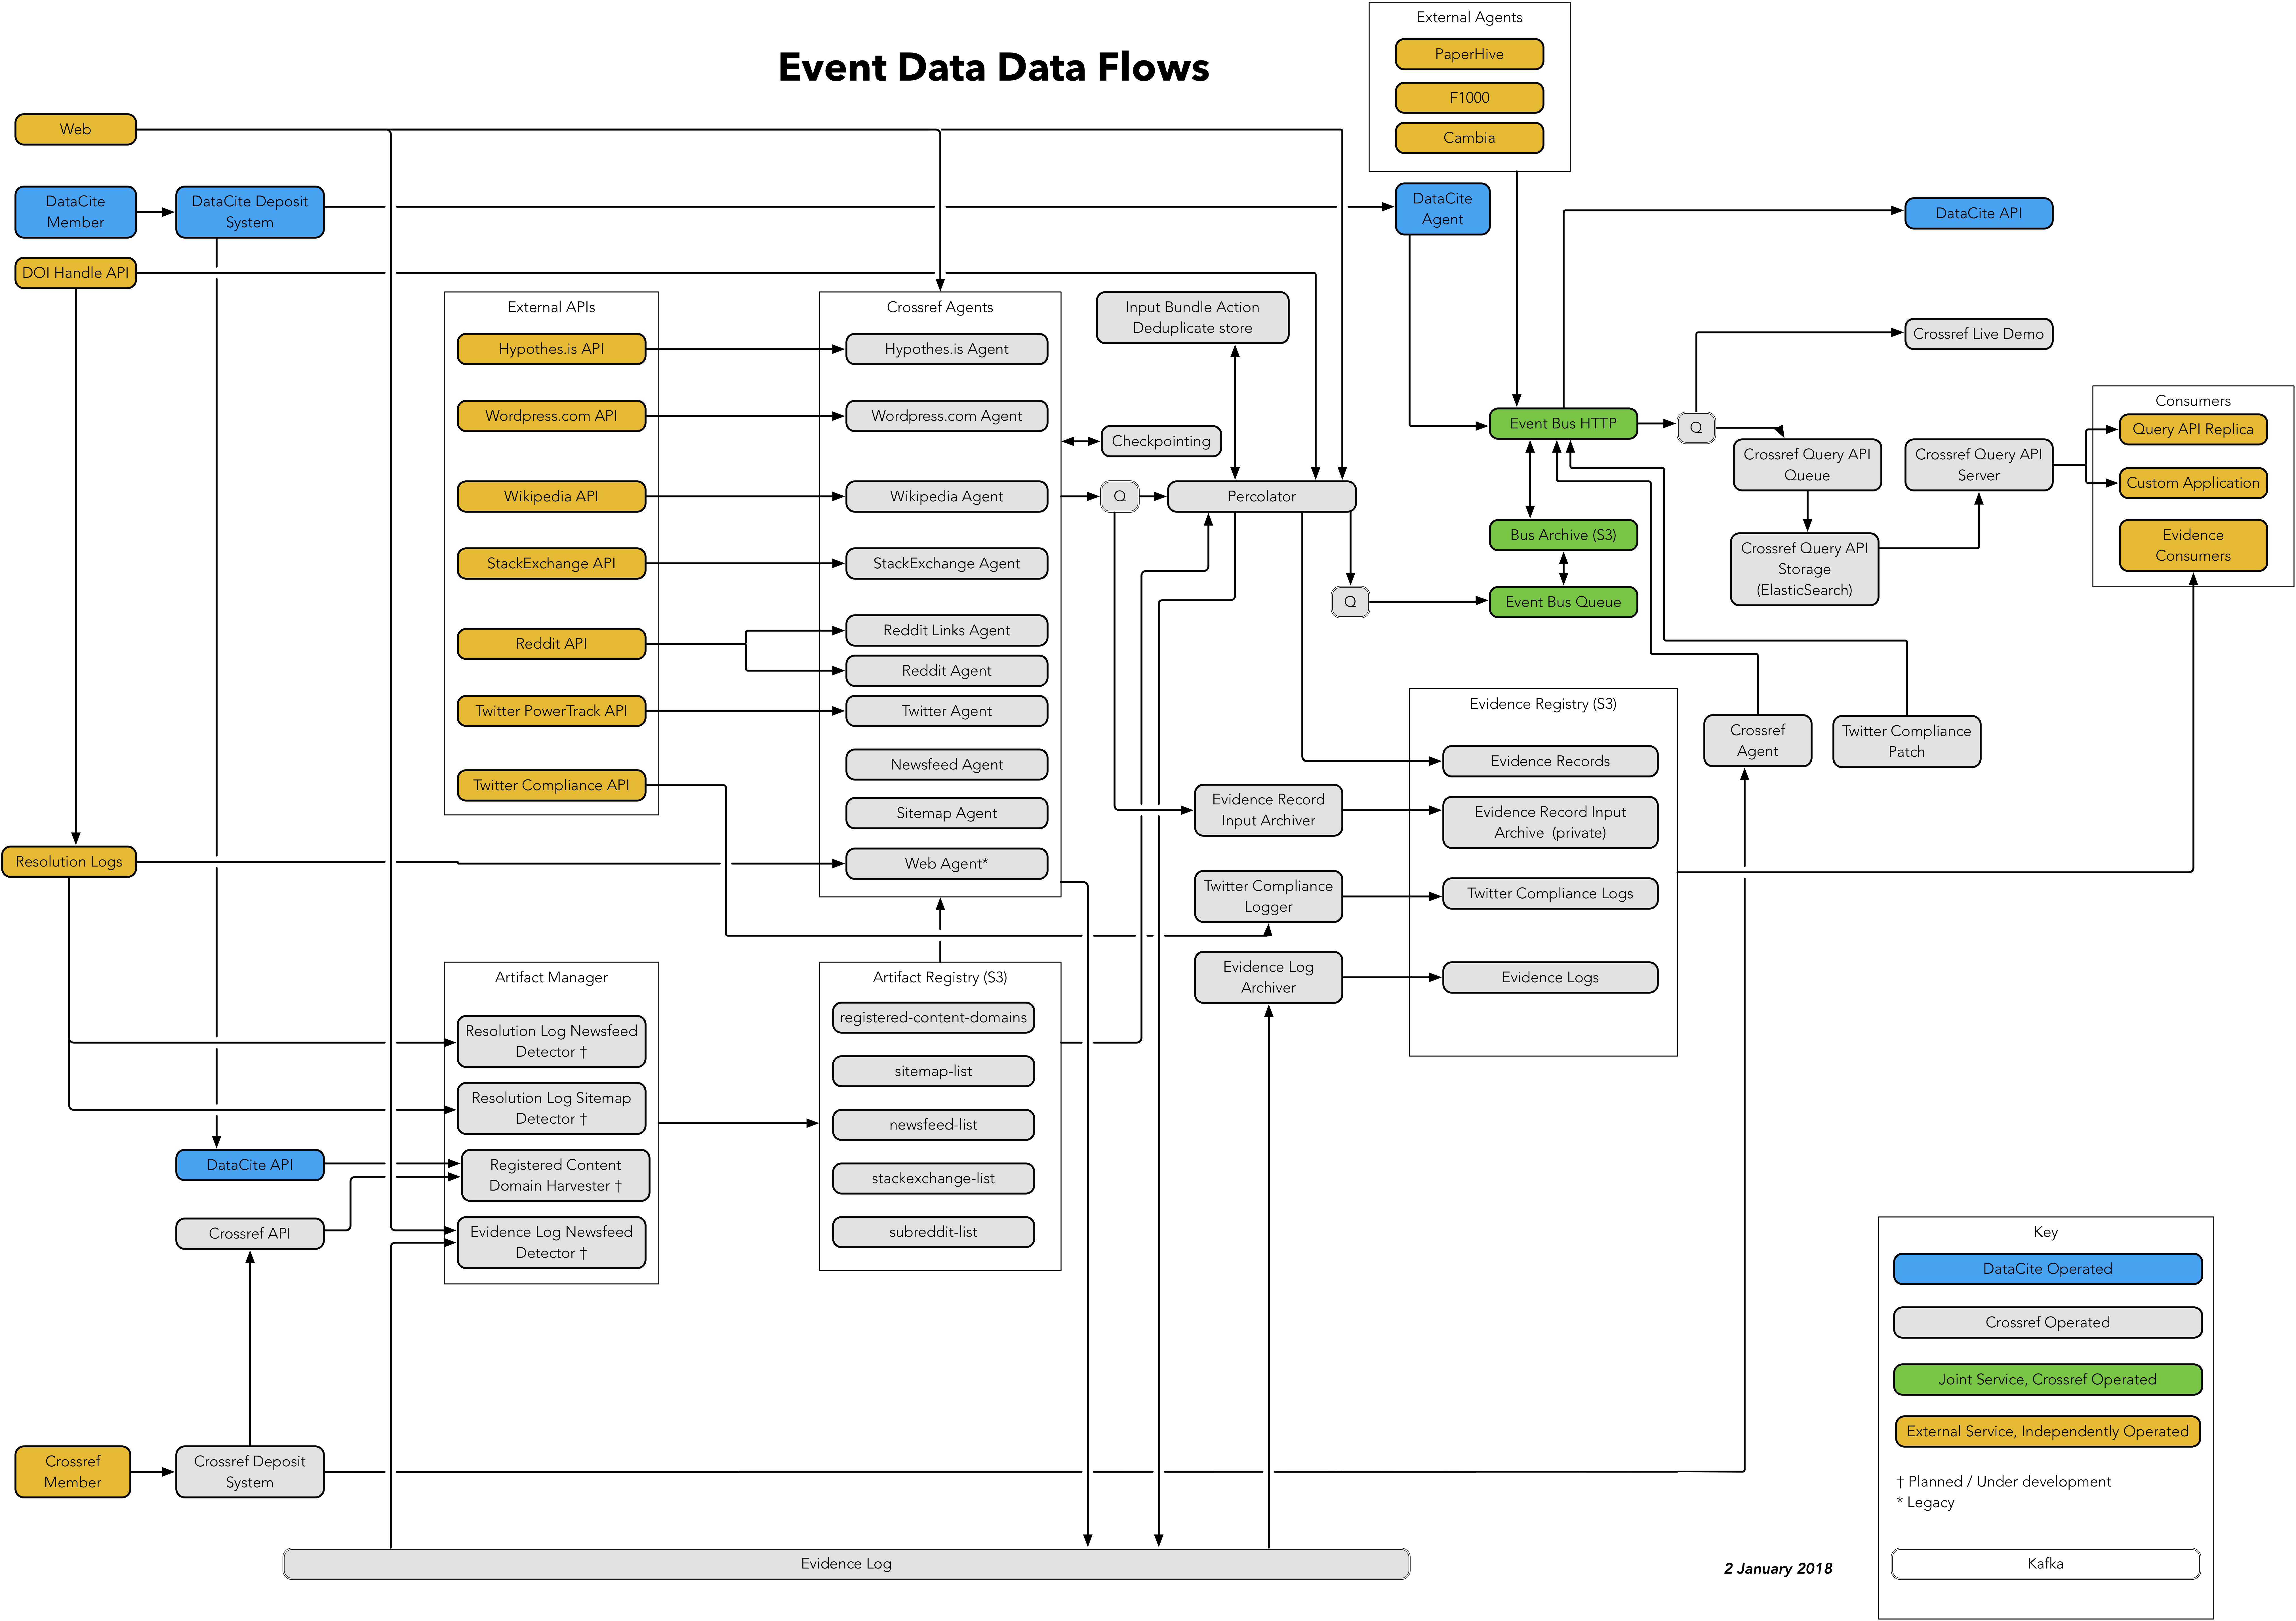 Use event. Appendix-3 EFC overall Flow Chart. Eventdata.